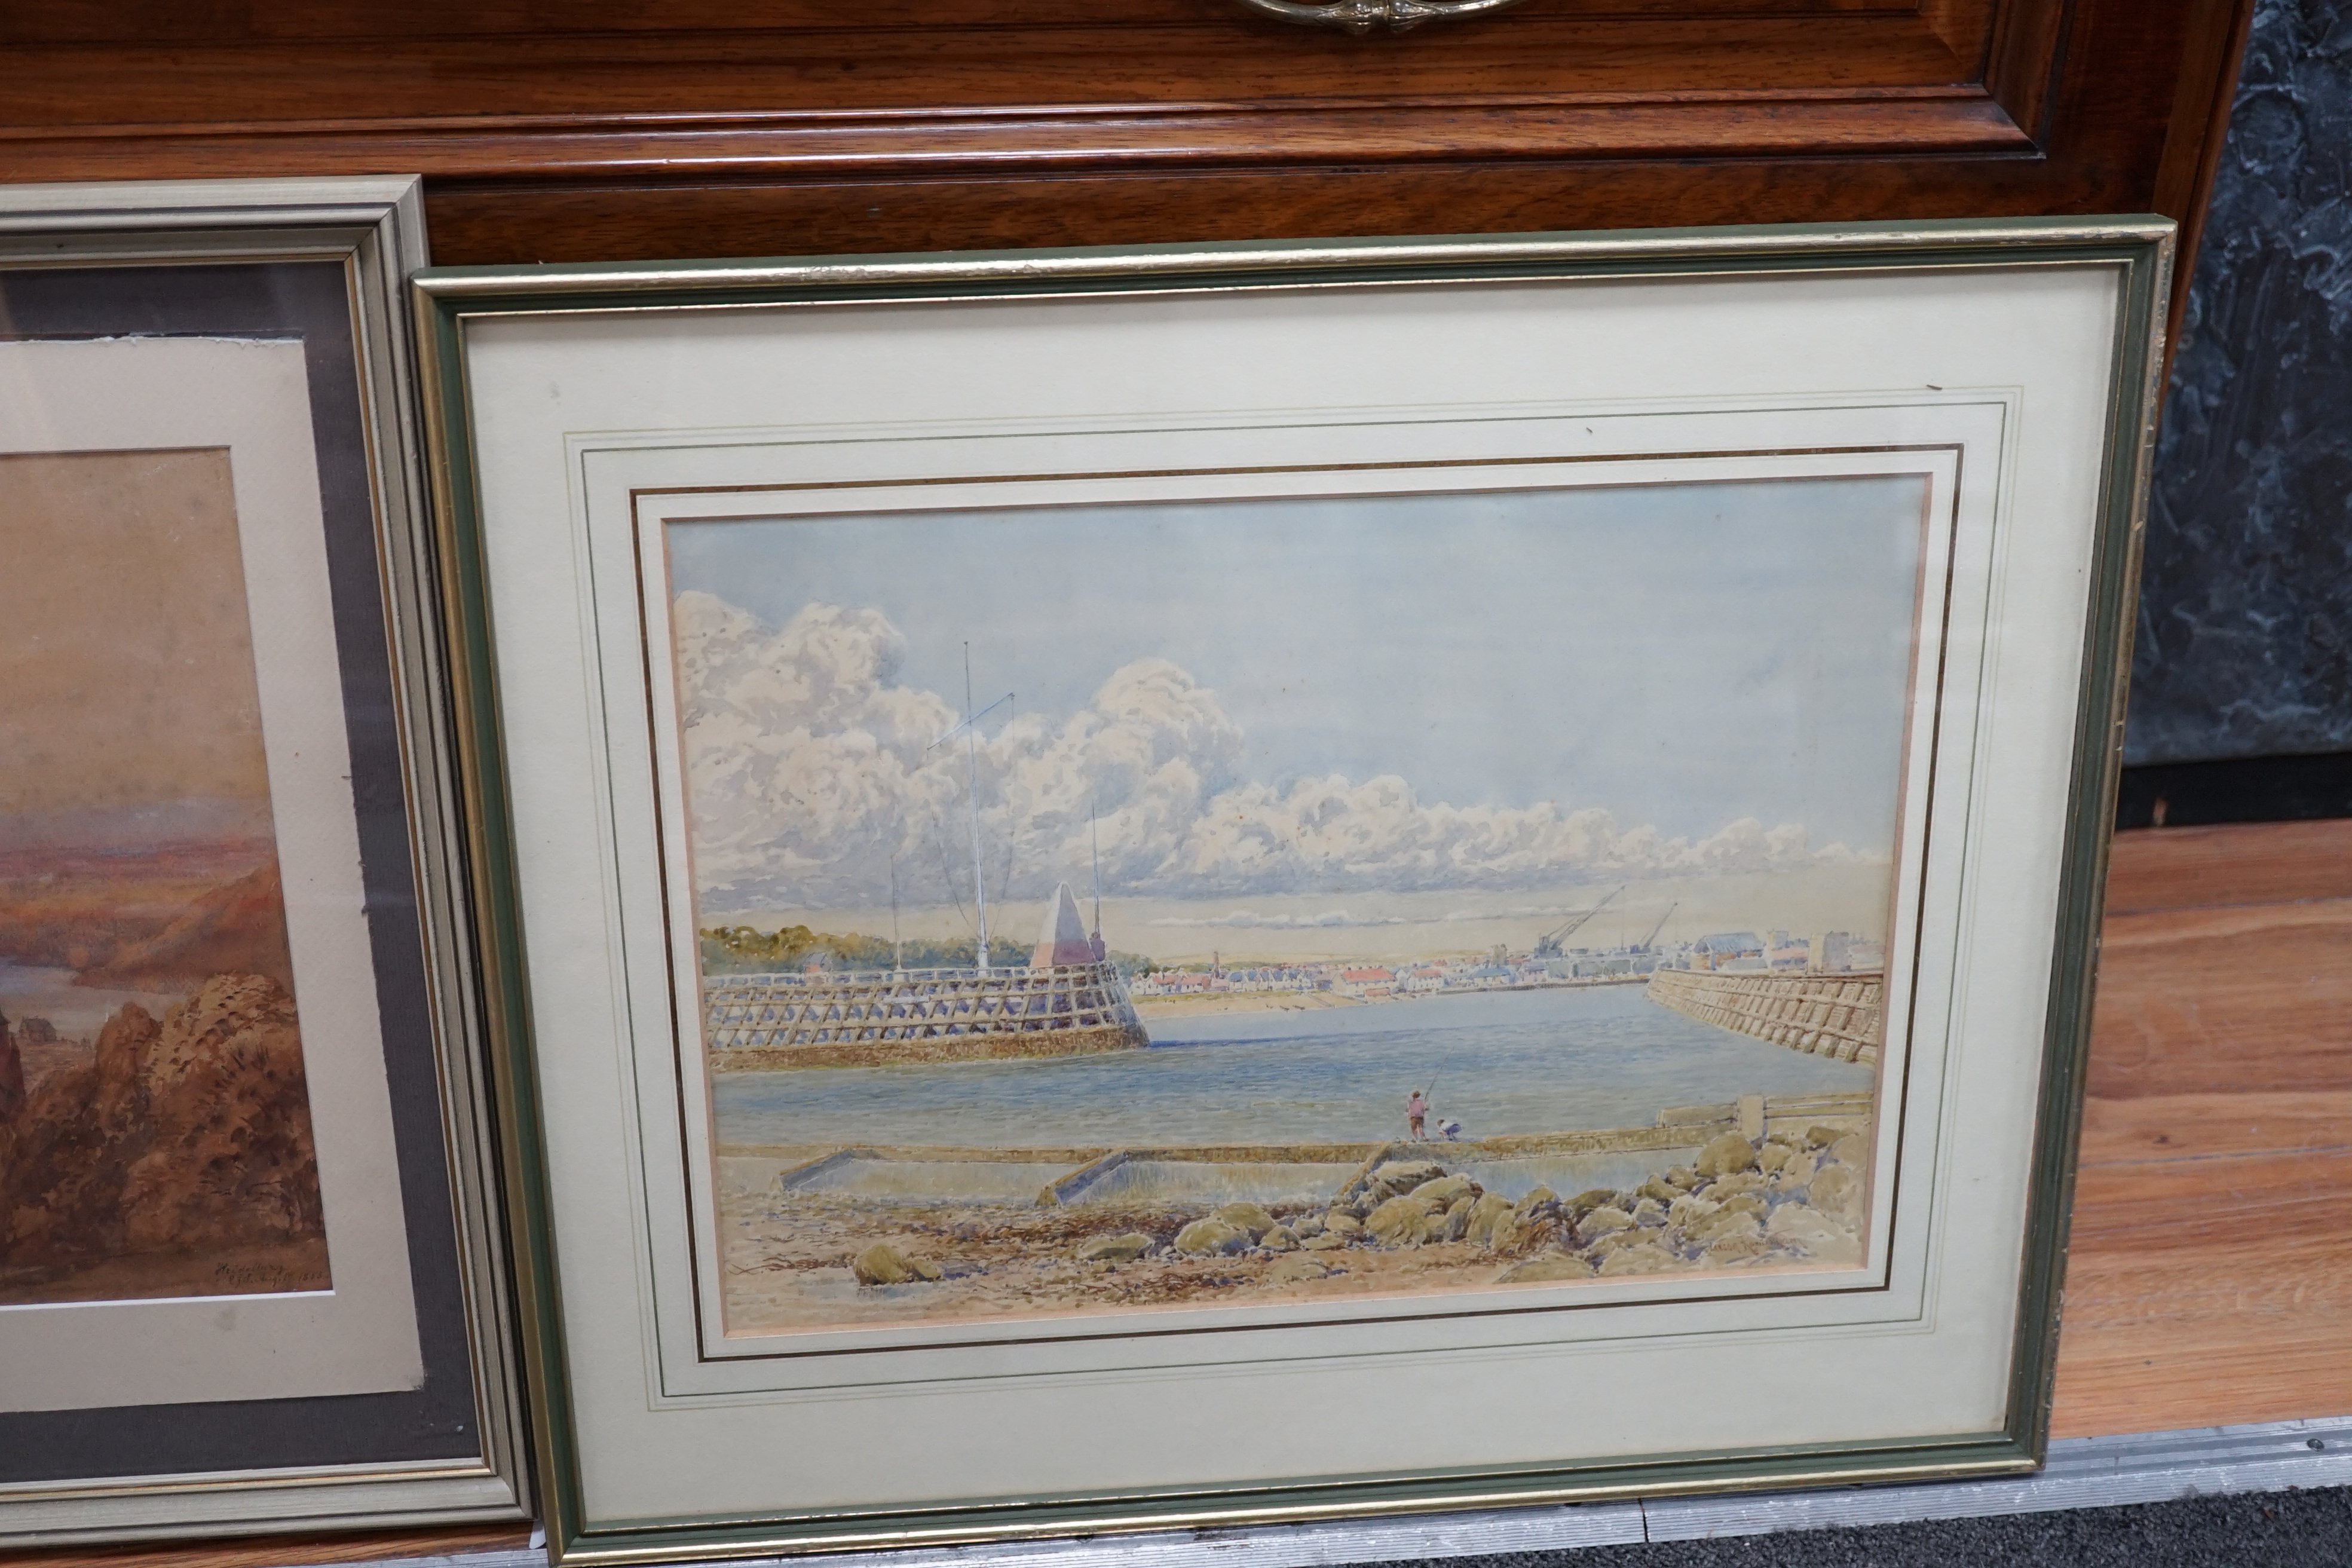 Two 19th century watercolours comprising: Thomas Leeson Rowbotham (1823-1875) and attributed to Eliza Turck (1832-1891), German landscape and Shoreham-by-Sea, each signed, largest 27 x 45cm. Condition - poor to fair